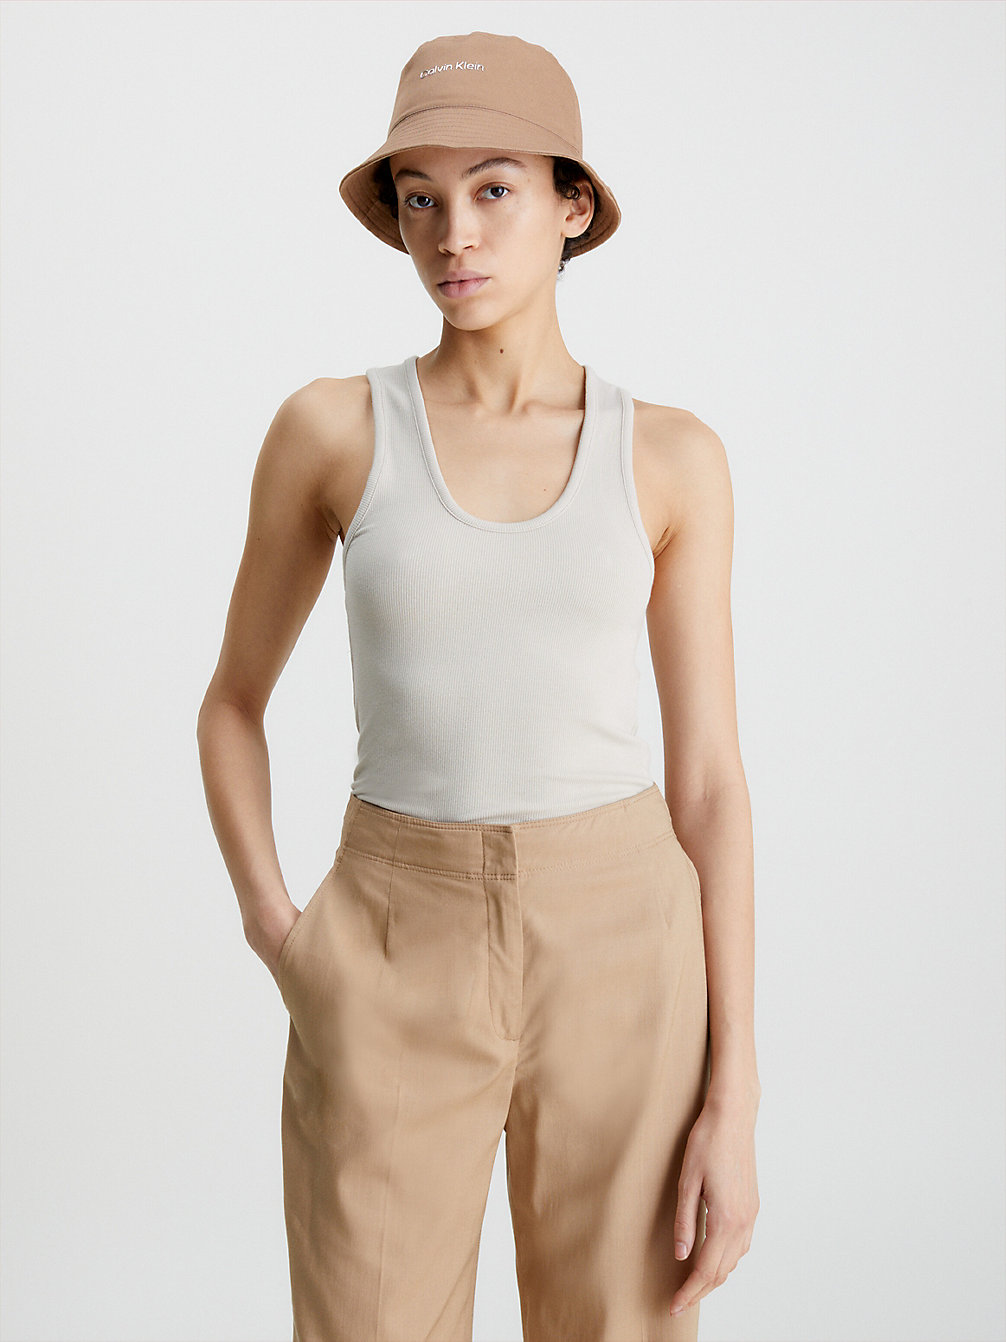 SMOOTH BEIGE Skinny Modal Ribbed Tank Top undefined women Calvin Klein